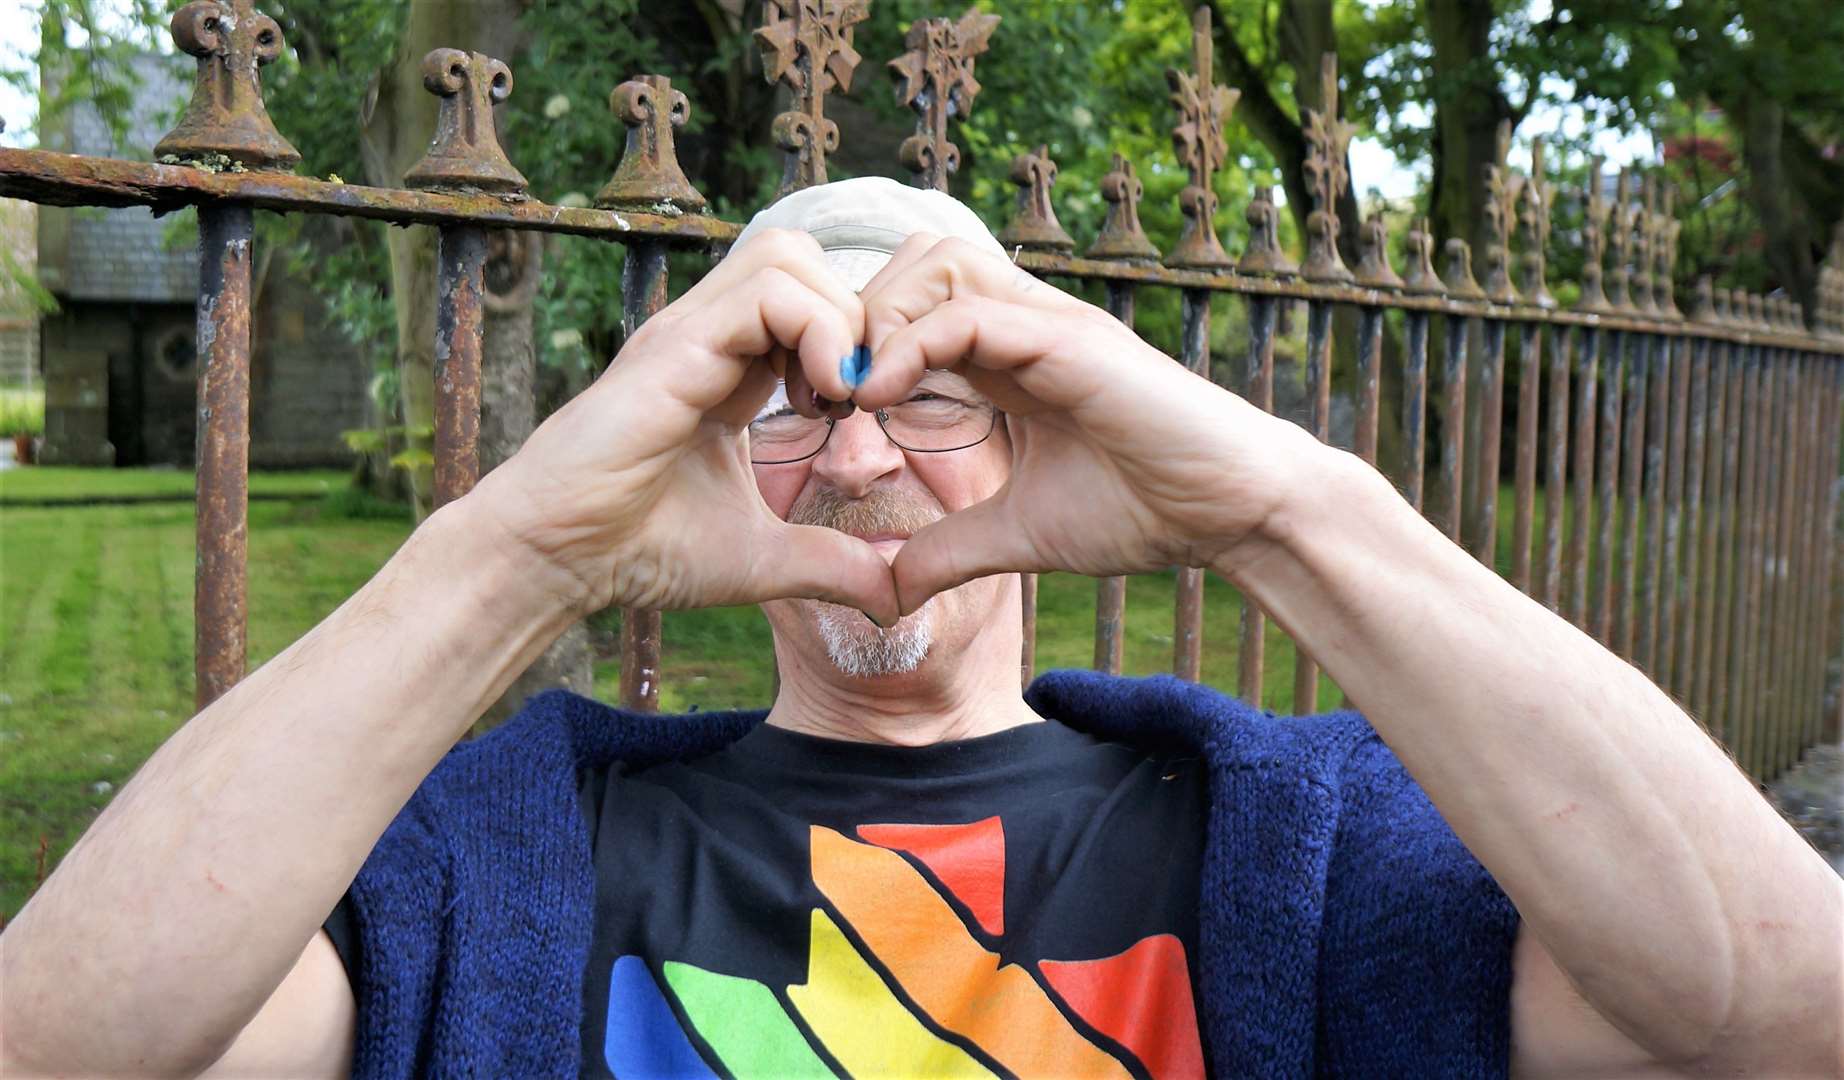 The teacher makes a hand heart gesture as a symbol of love and tolerance during Pride Month.